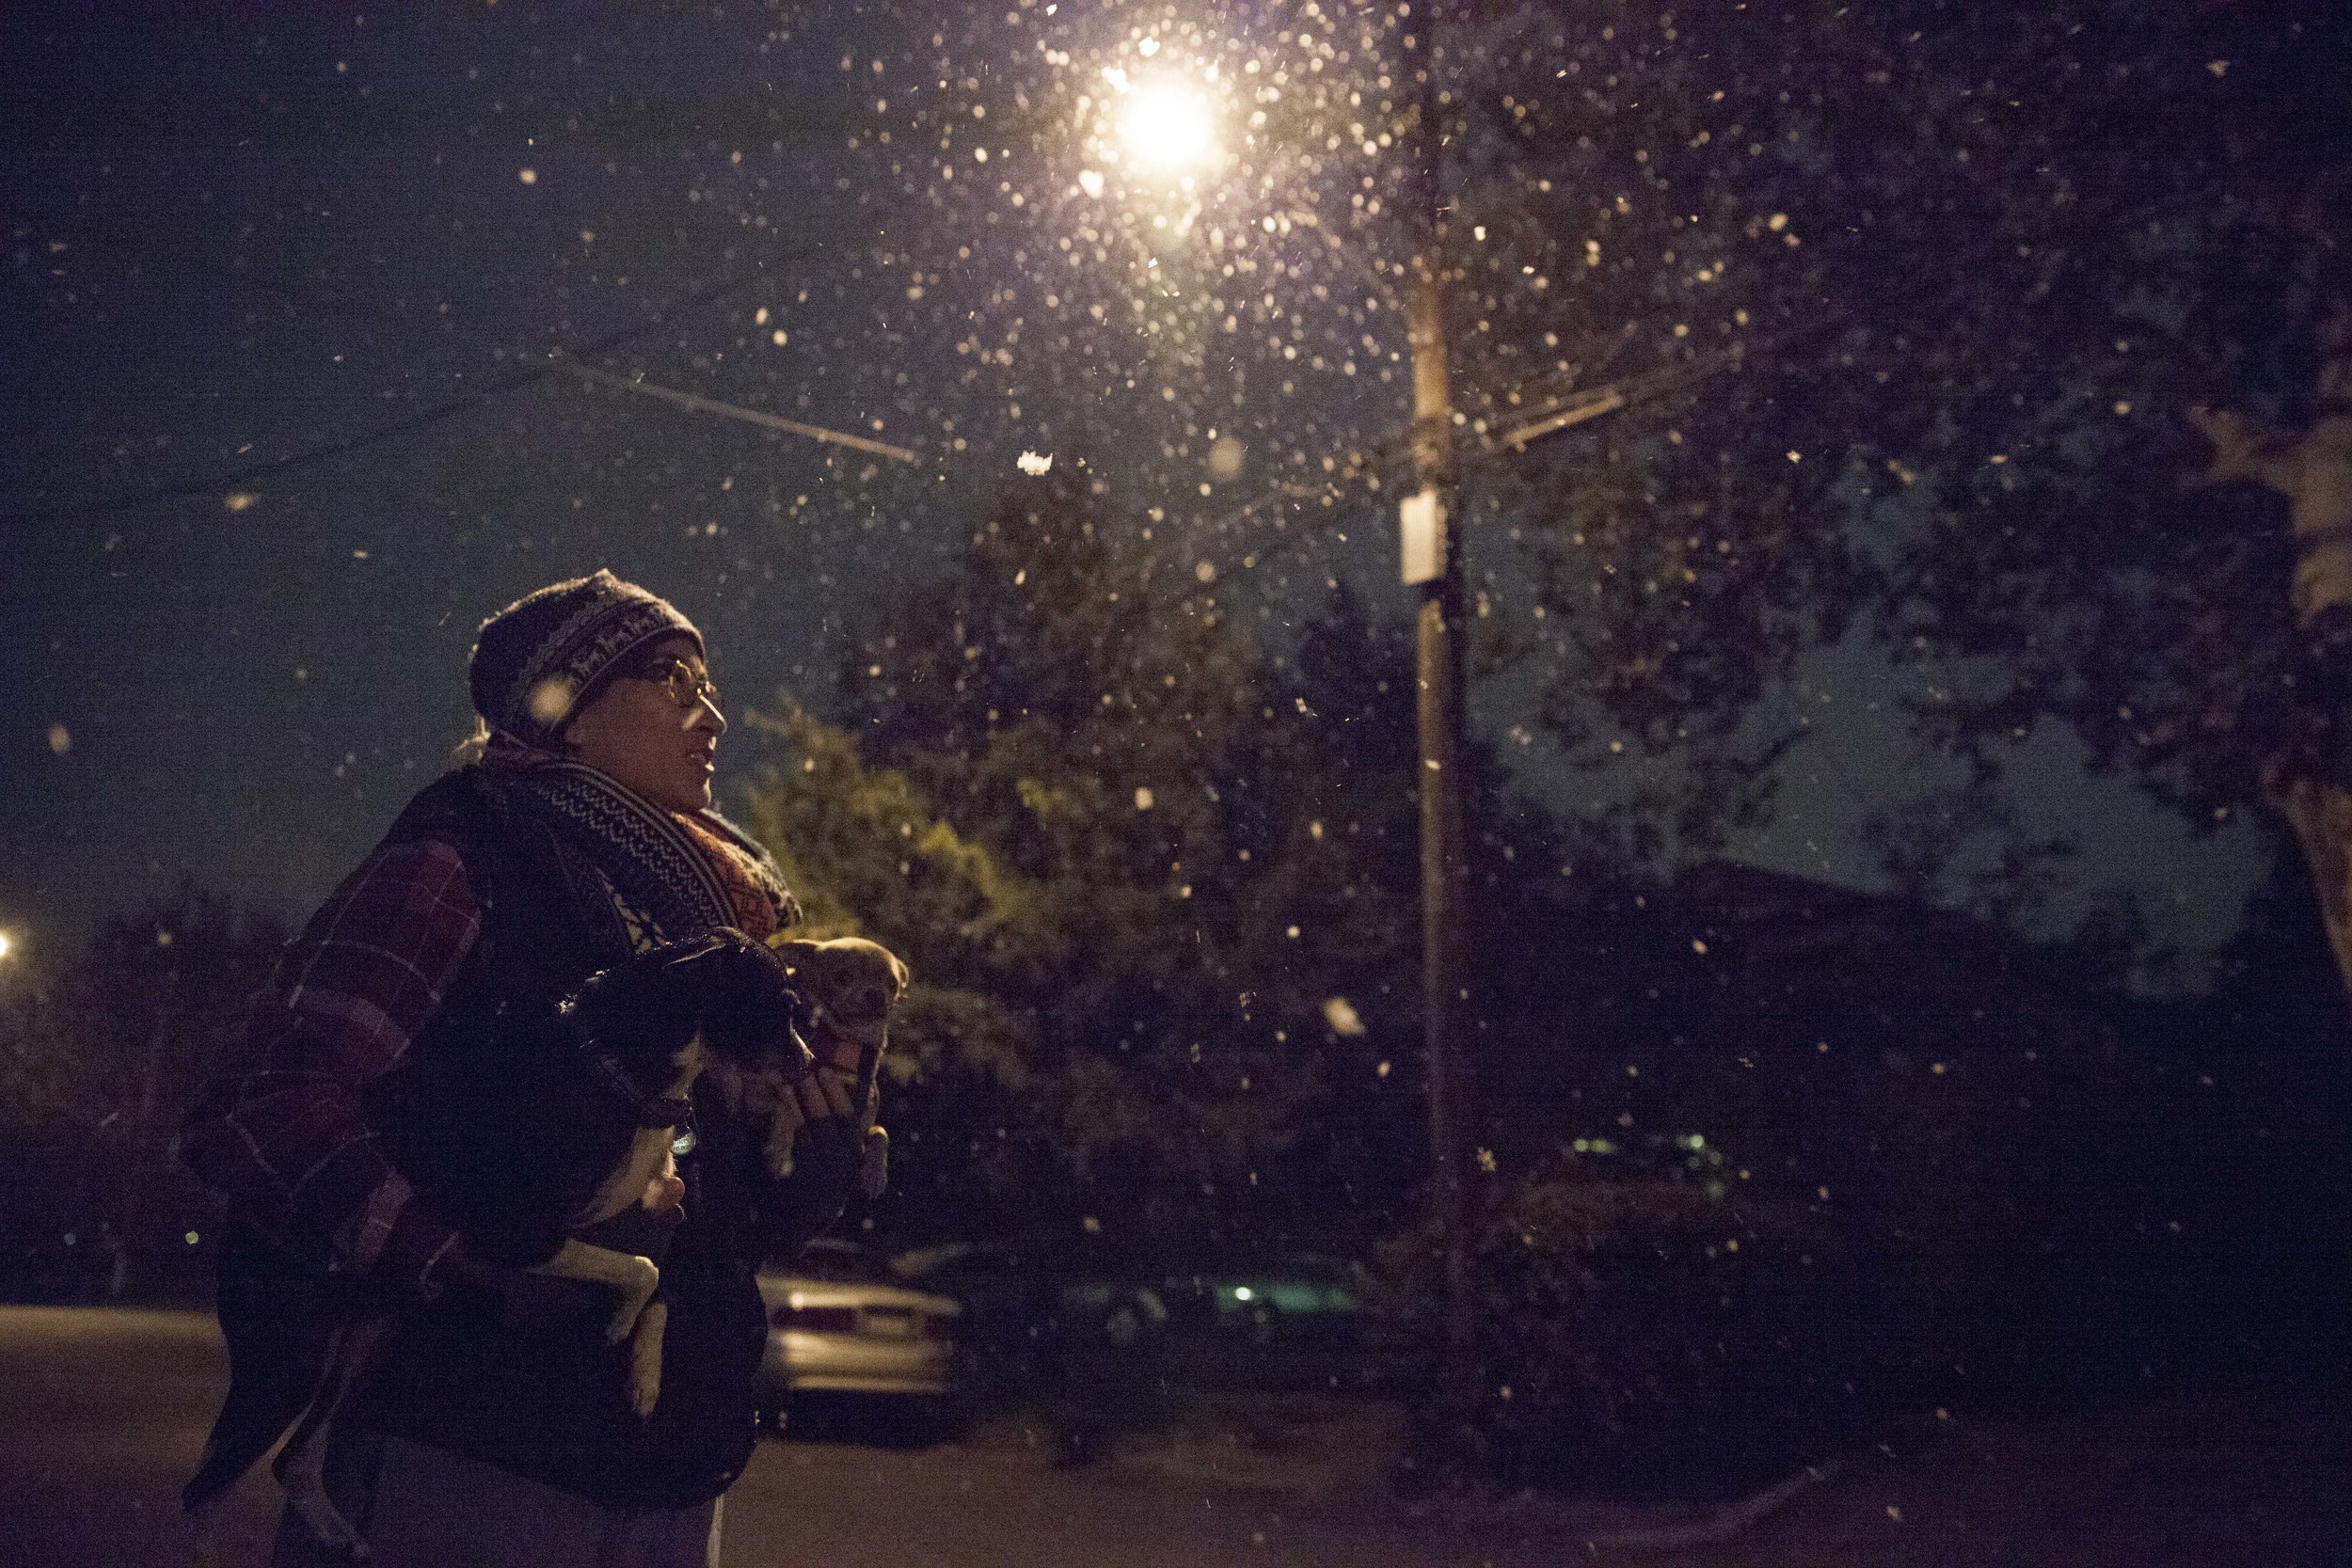  An east Dallas resident enjoys the first snow of the season with their 2 small dogs. 